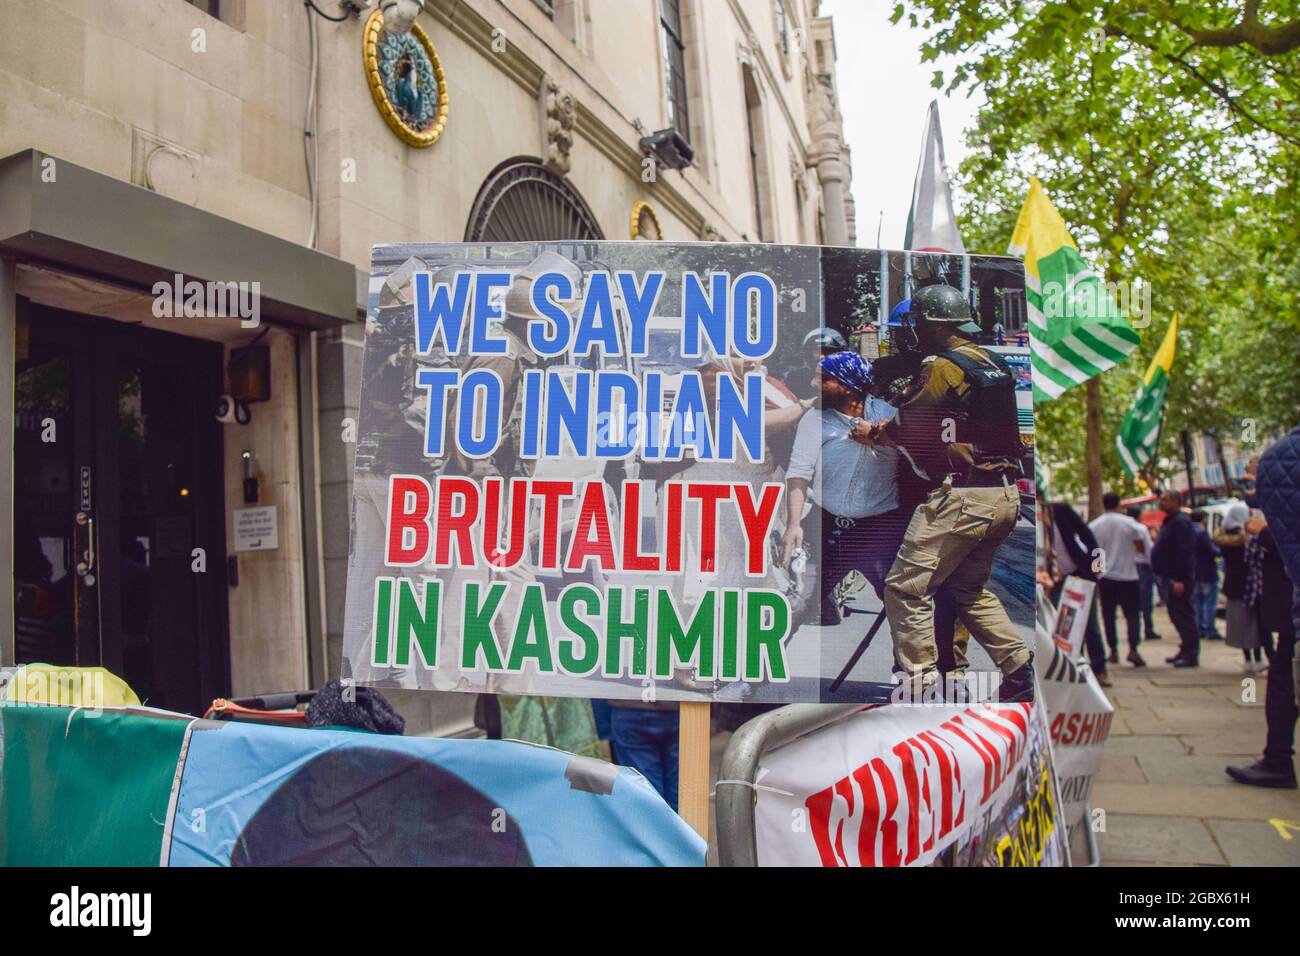 london-uk-05th-aug-2021-a-placard-which-says-we-say-no-to-indian-brutality-in-kashmir-is-seen-...jpg